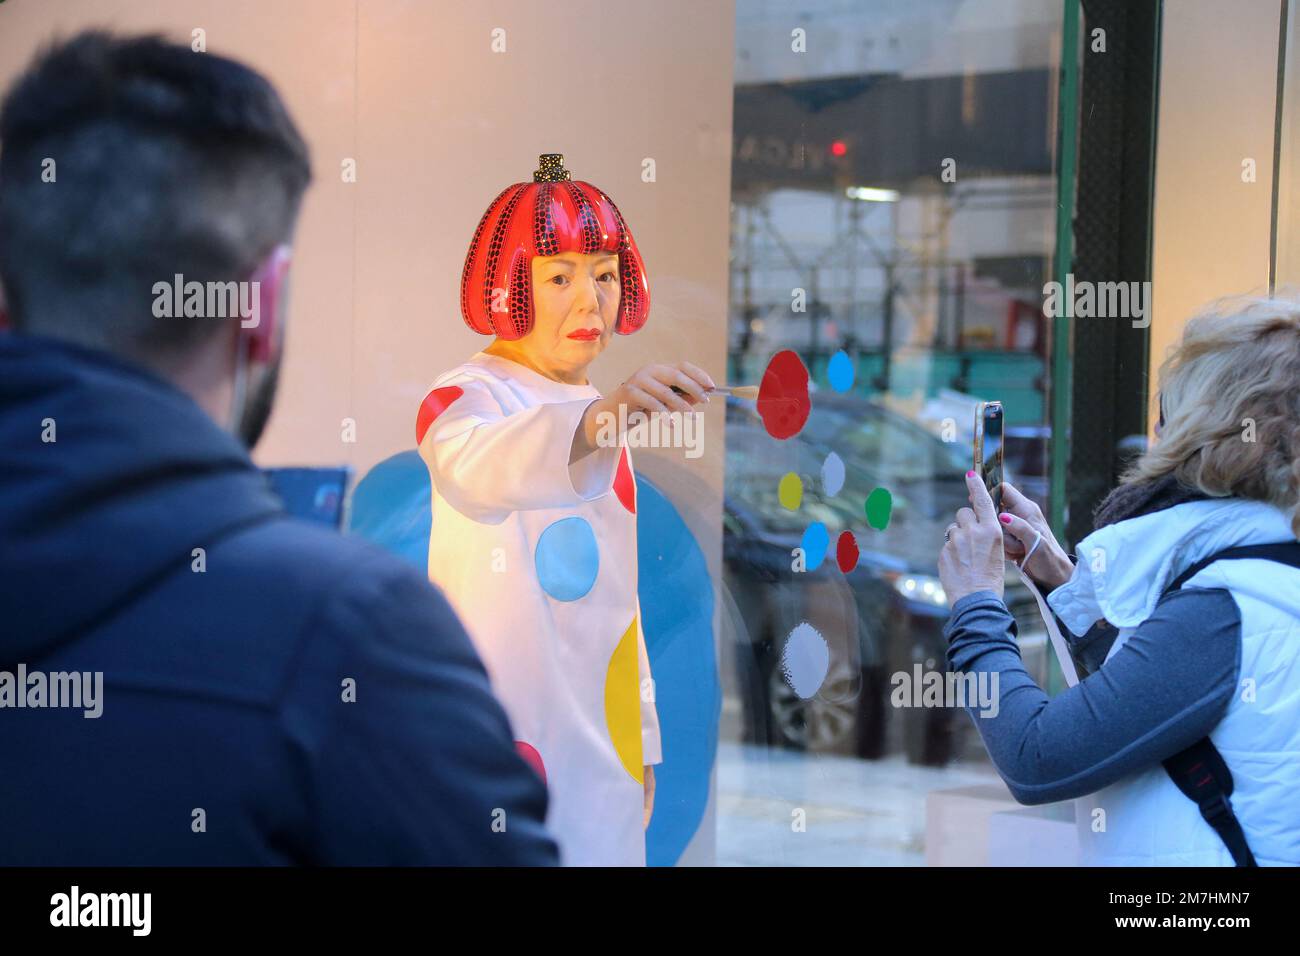 Hyper-realistic Yayoi Kusama robot spotted in London for fashion line